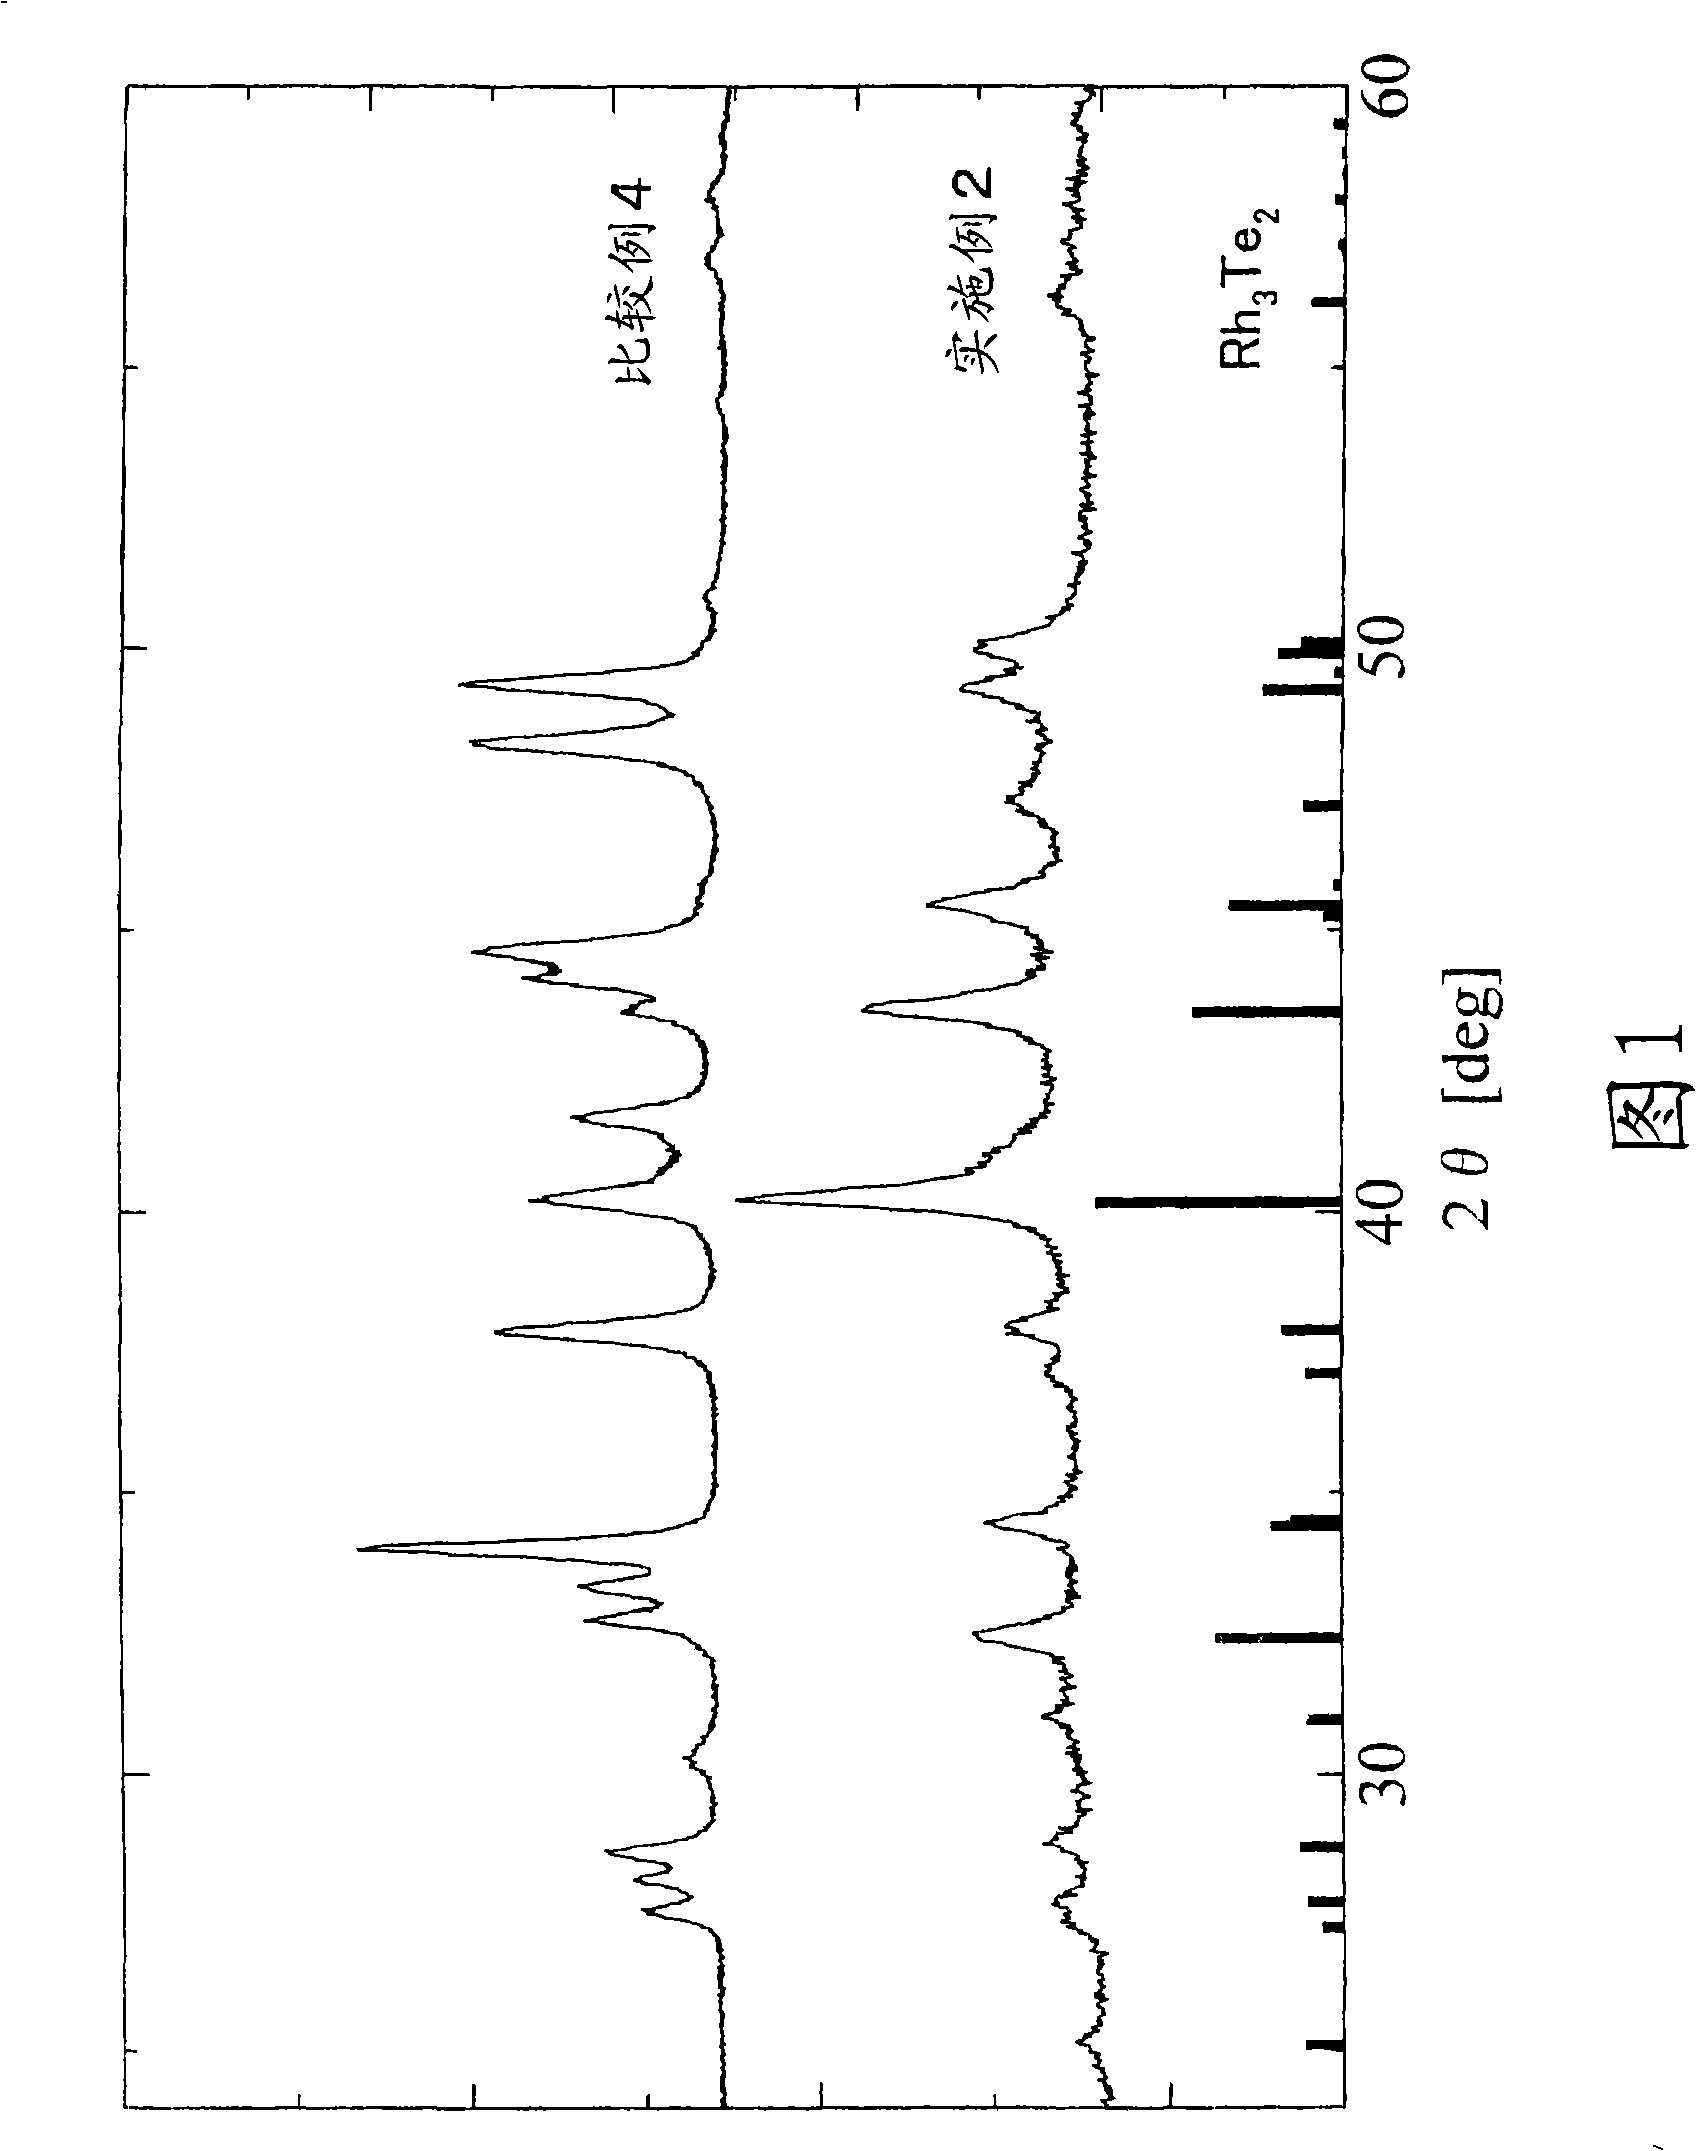 Rhodium-tellurium intermetallic compound particle, method for producing the same, and use of the same